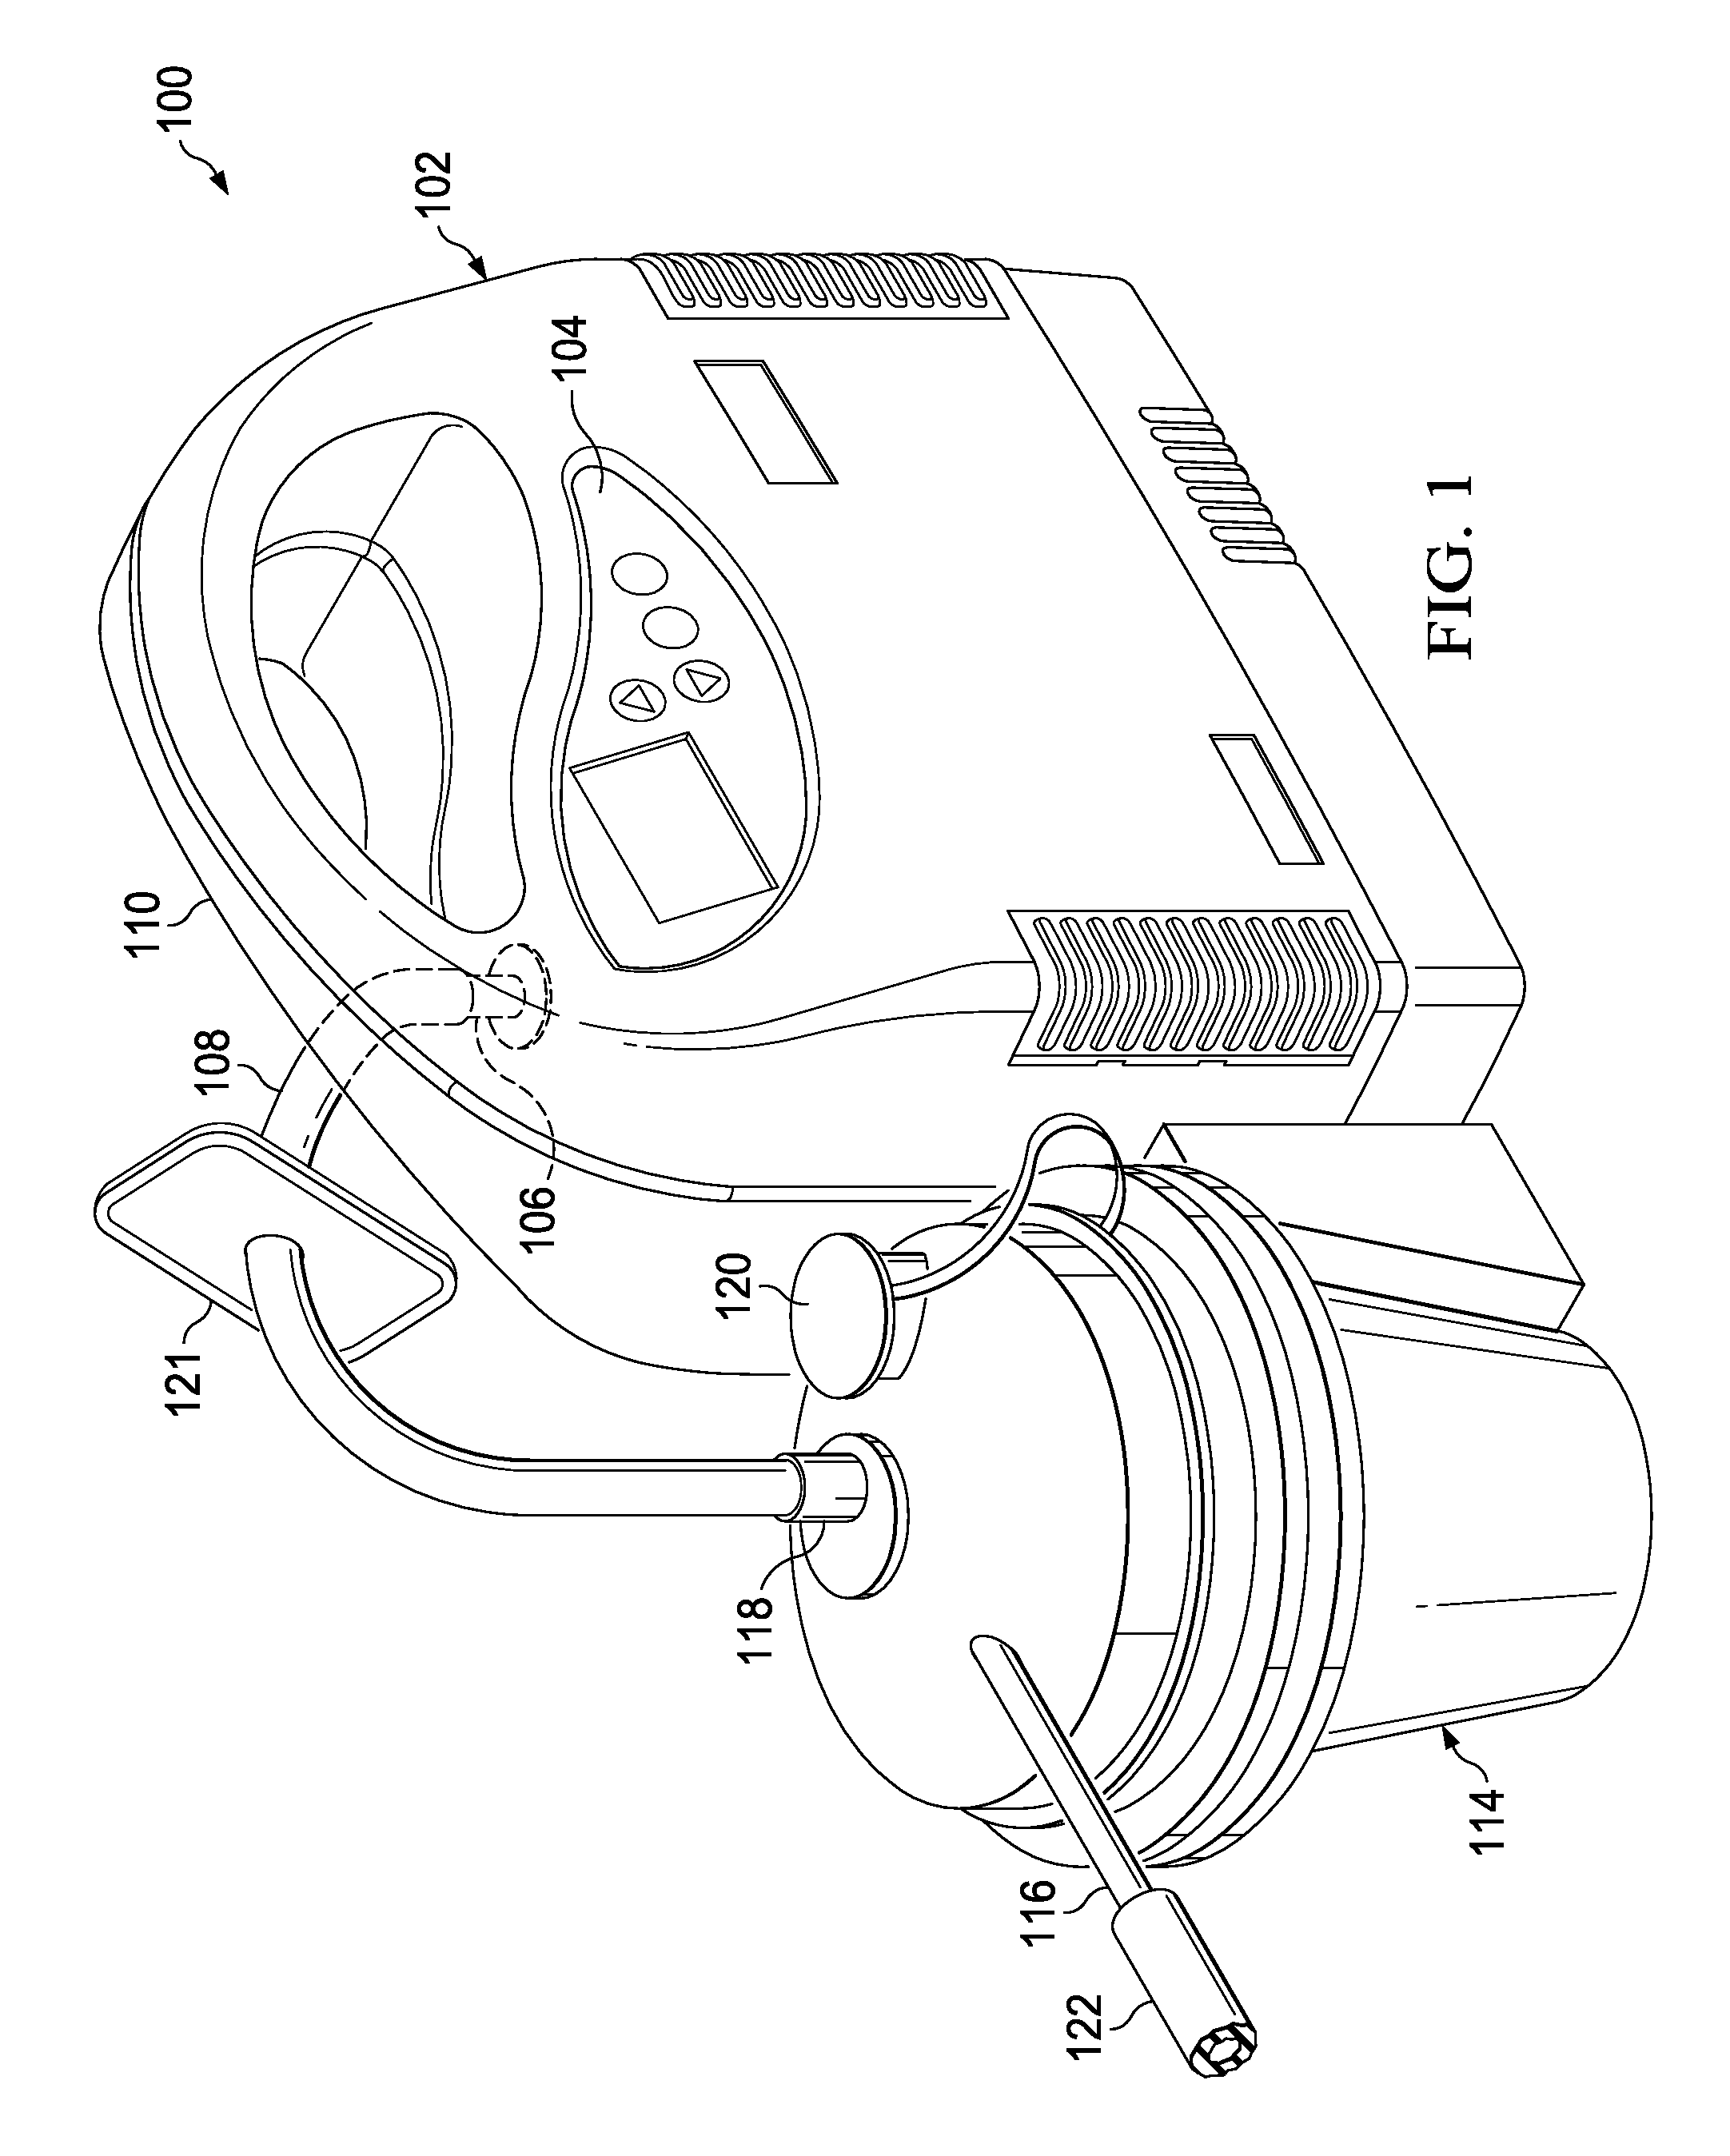 System, Method, and Pump to Prevent Pump Contamination During Negative Pressure Wound Therapy